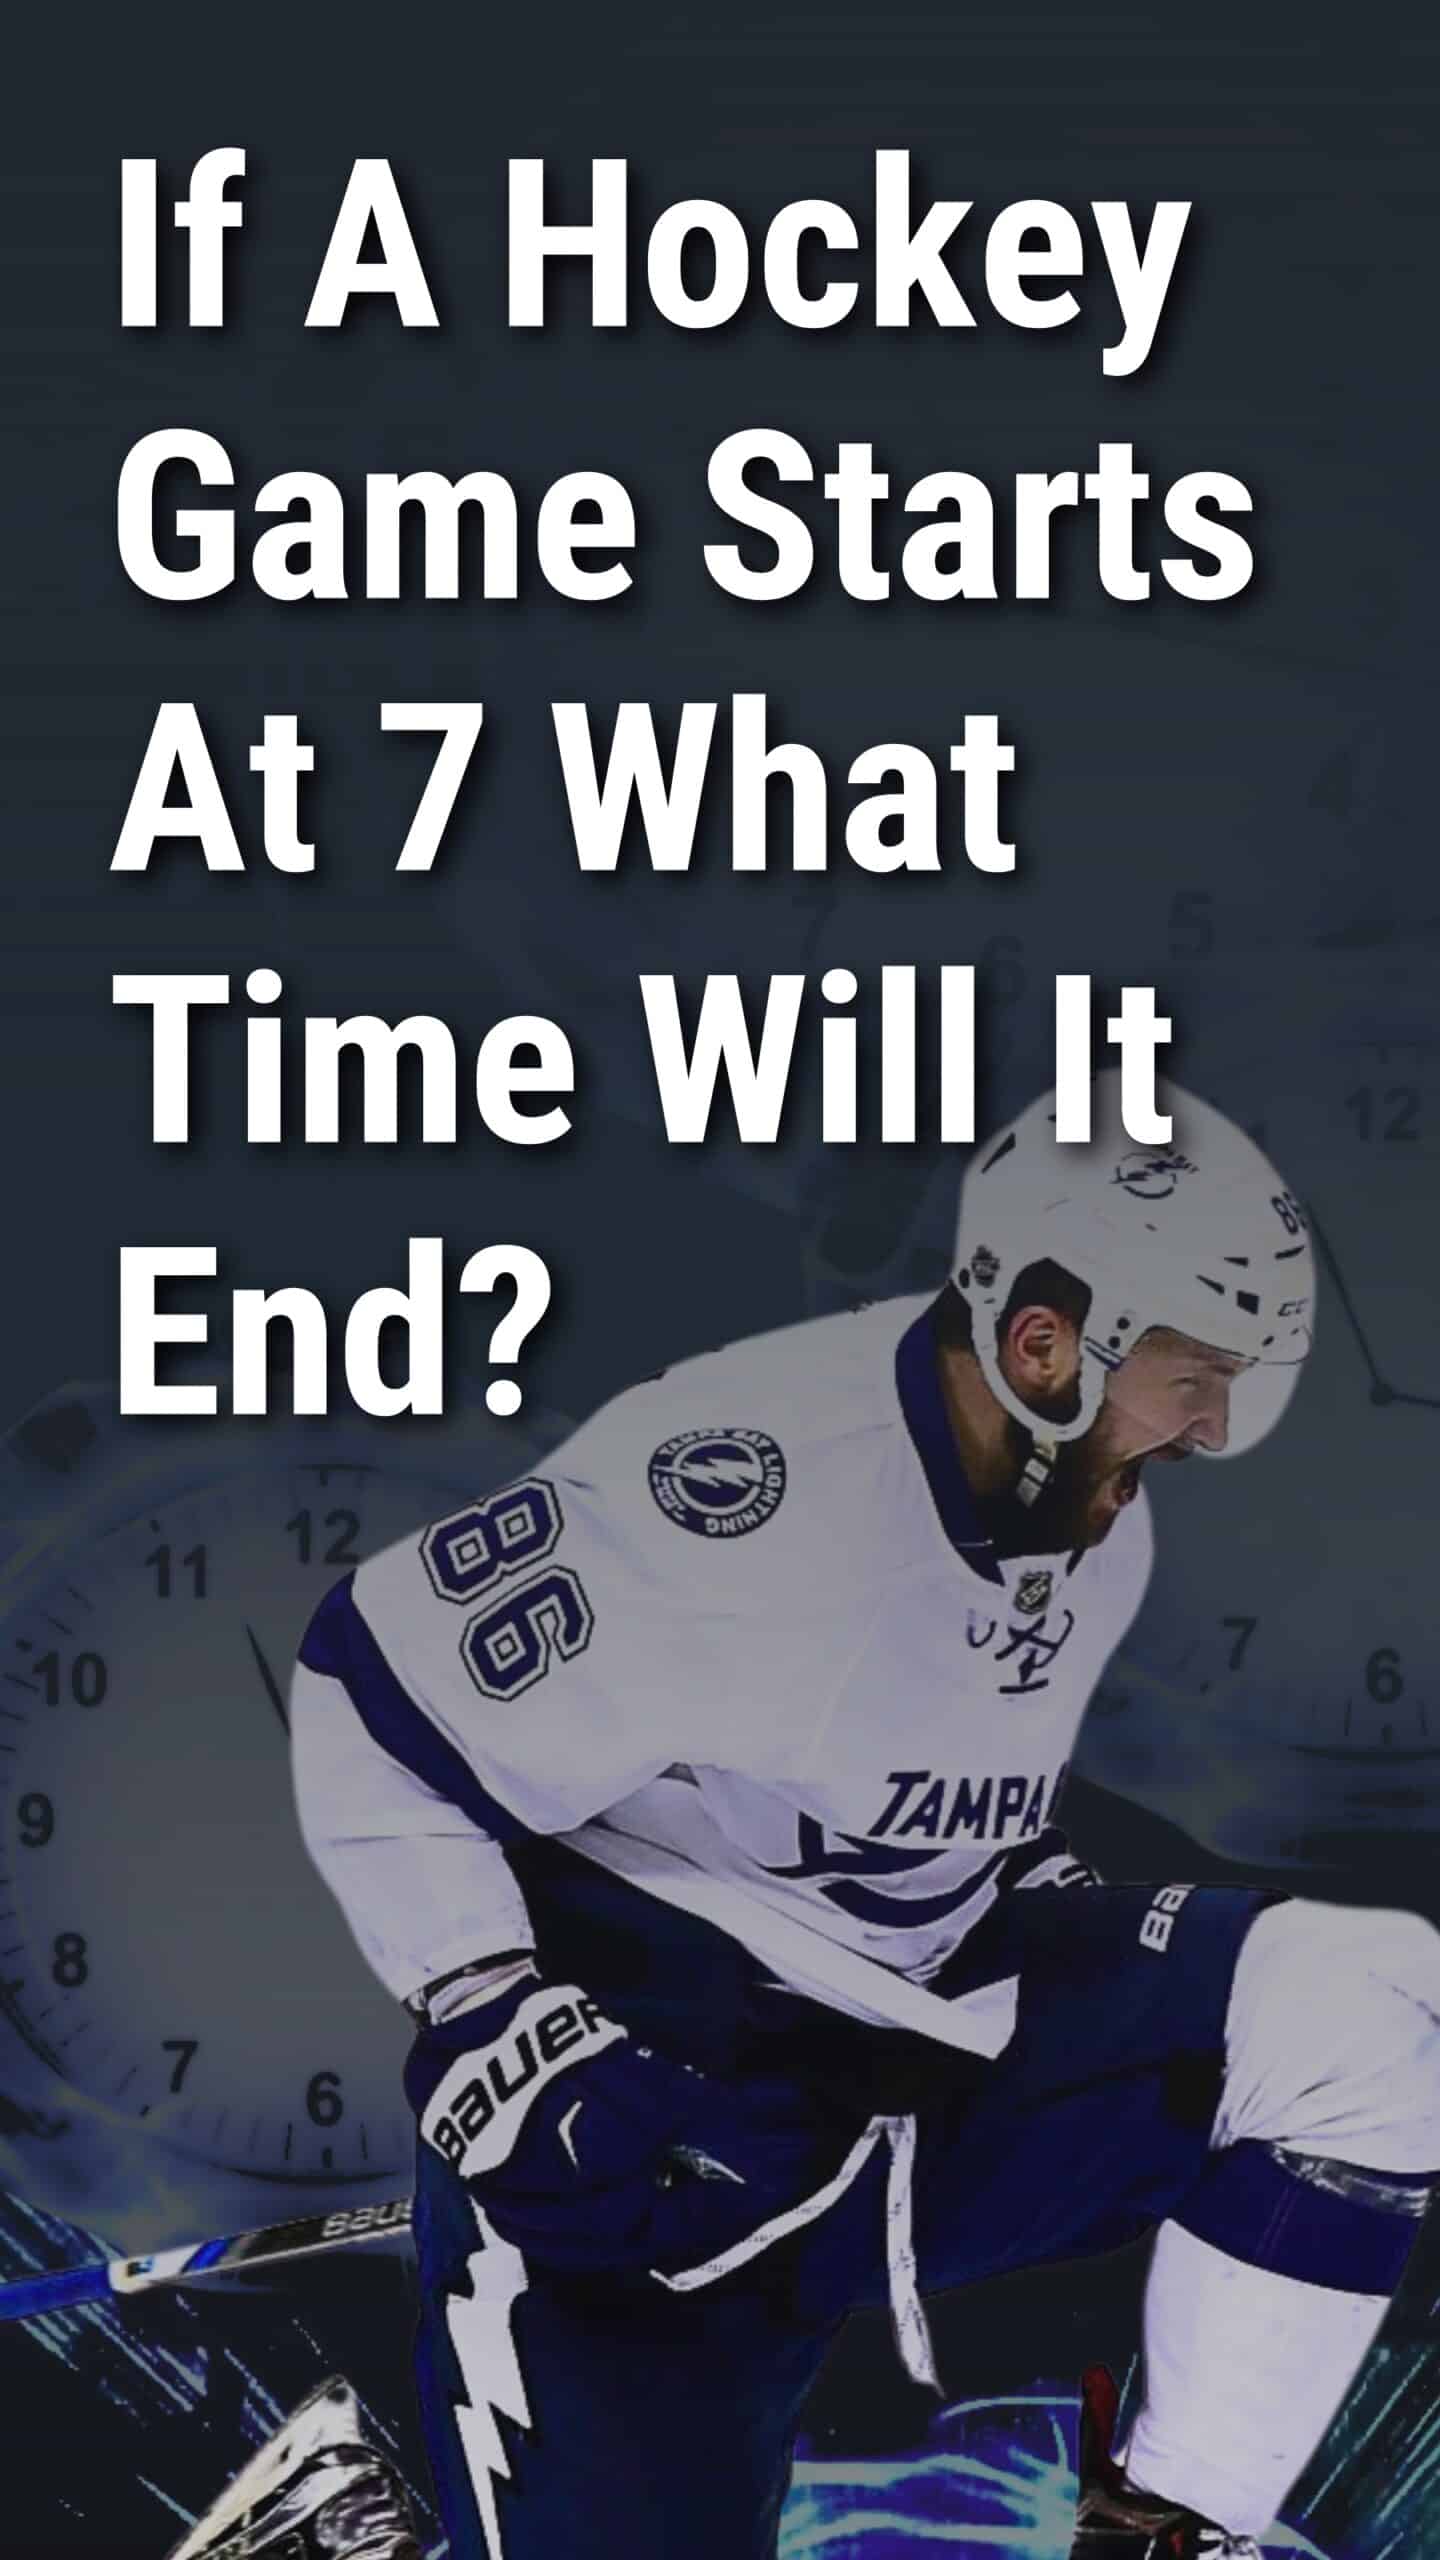 If A Hockey Game Starts At 7 What Time Will It End?